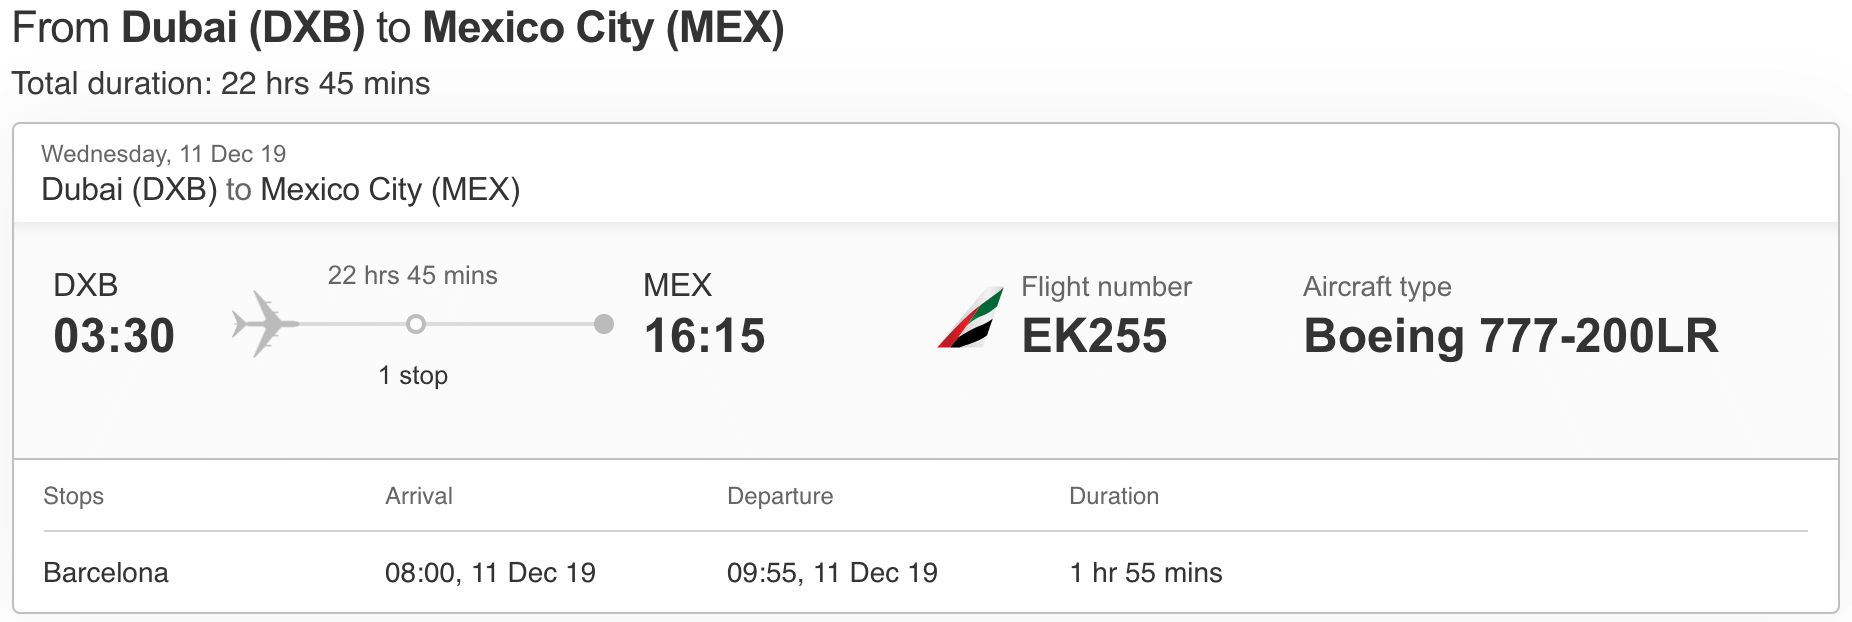 Emirates flight schedule between Dubai (DXB) and Mexico City (MEX)